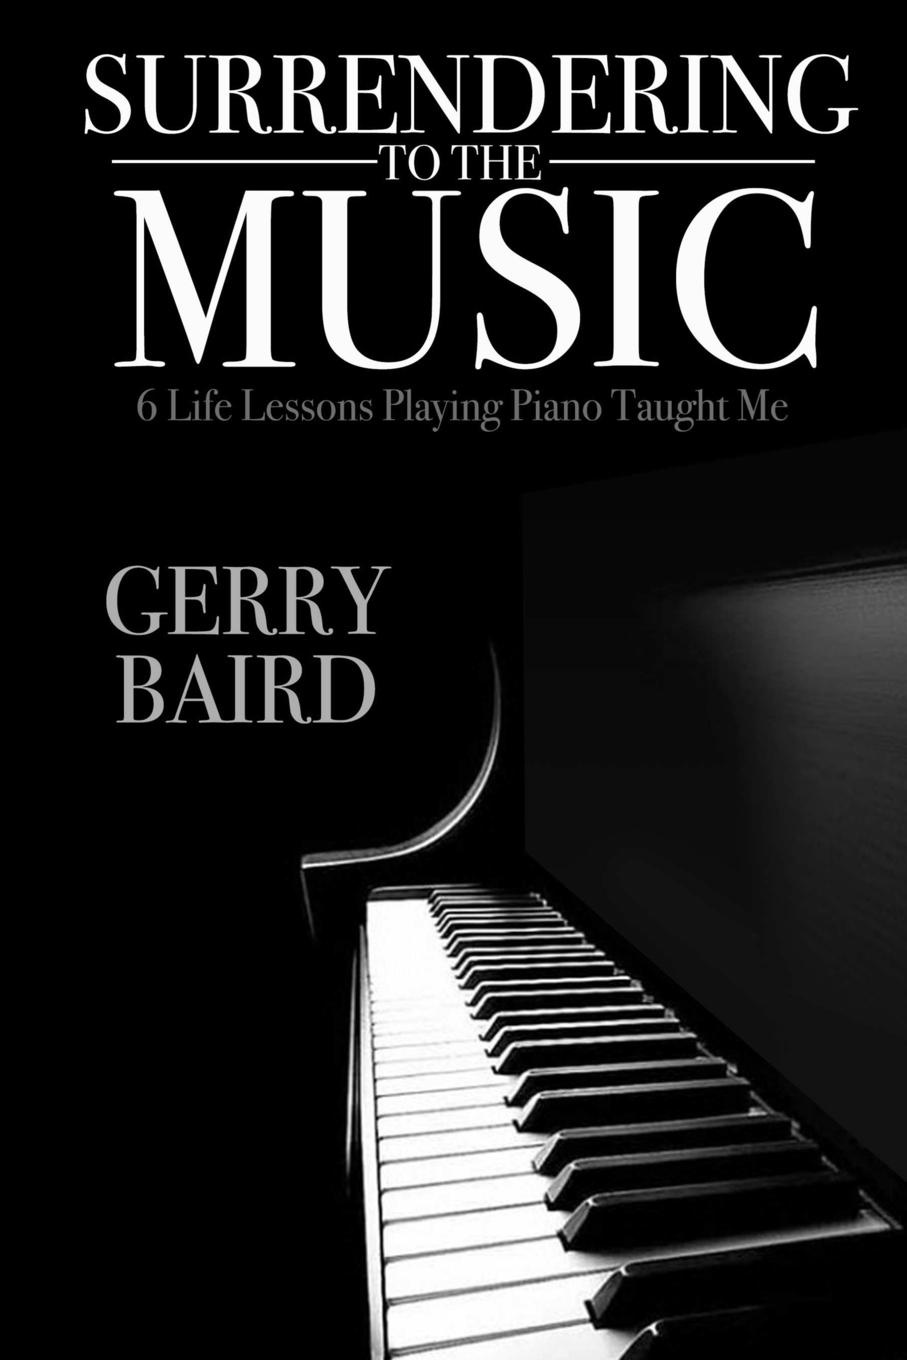 Surrendering to the Music. 6 Life Lessons Playing Piano Taught Me